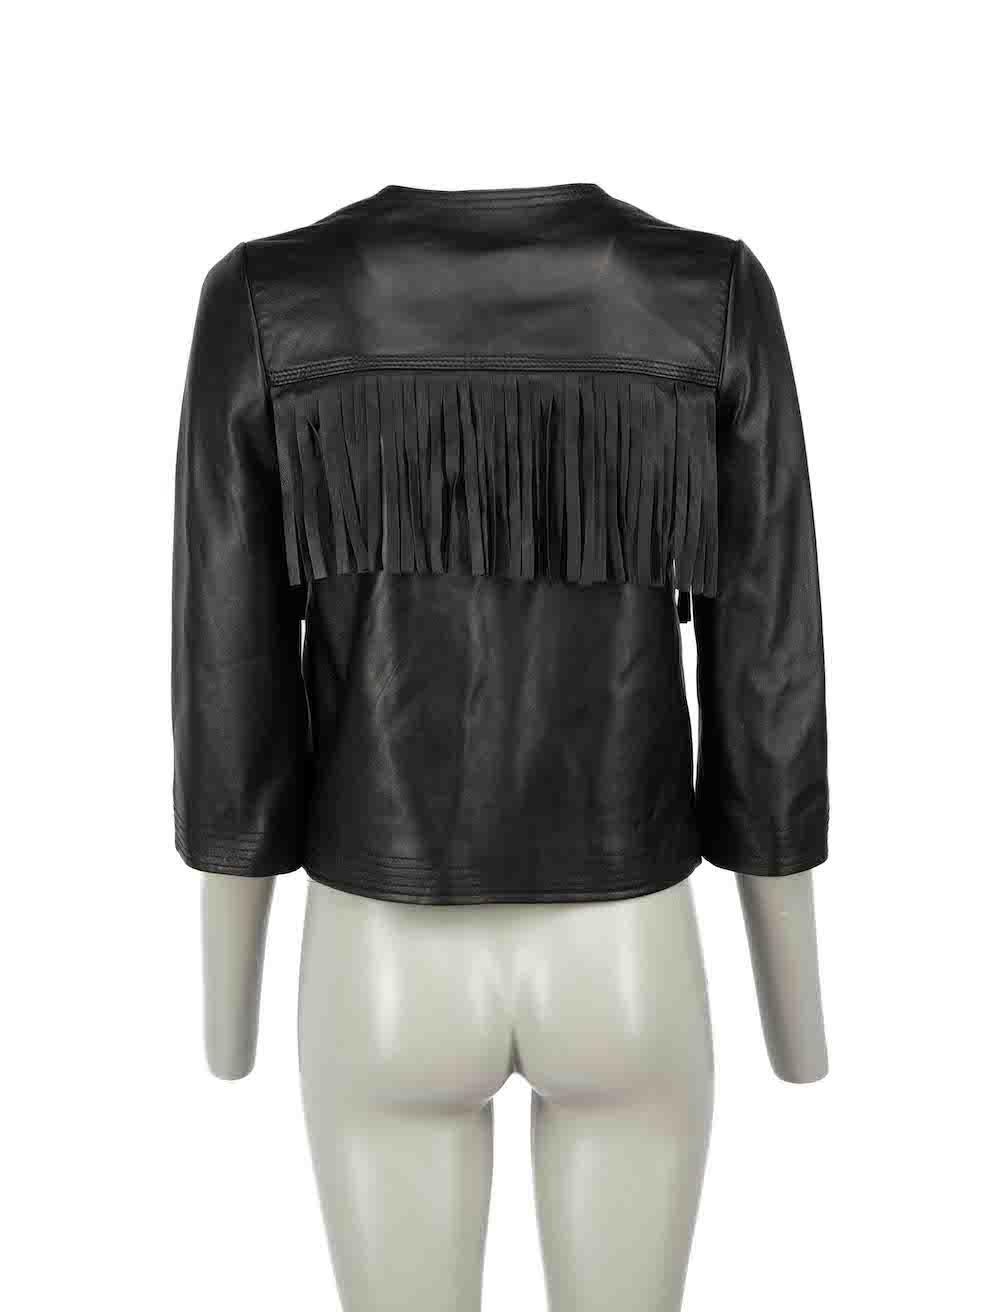 Roberto Cavalli Just Cavalli Black Leather Fringe Jacket Size XS In Good Condition In London, GB